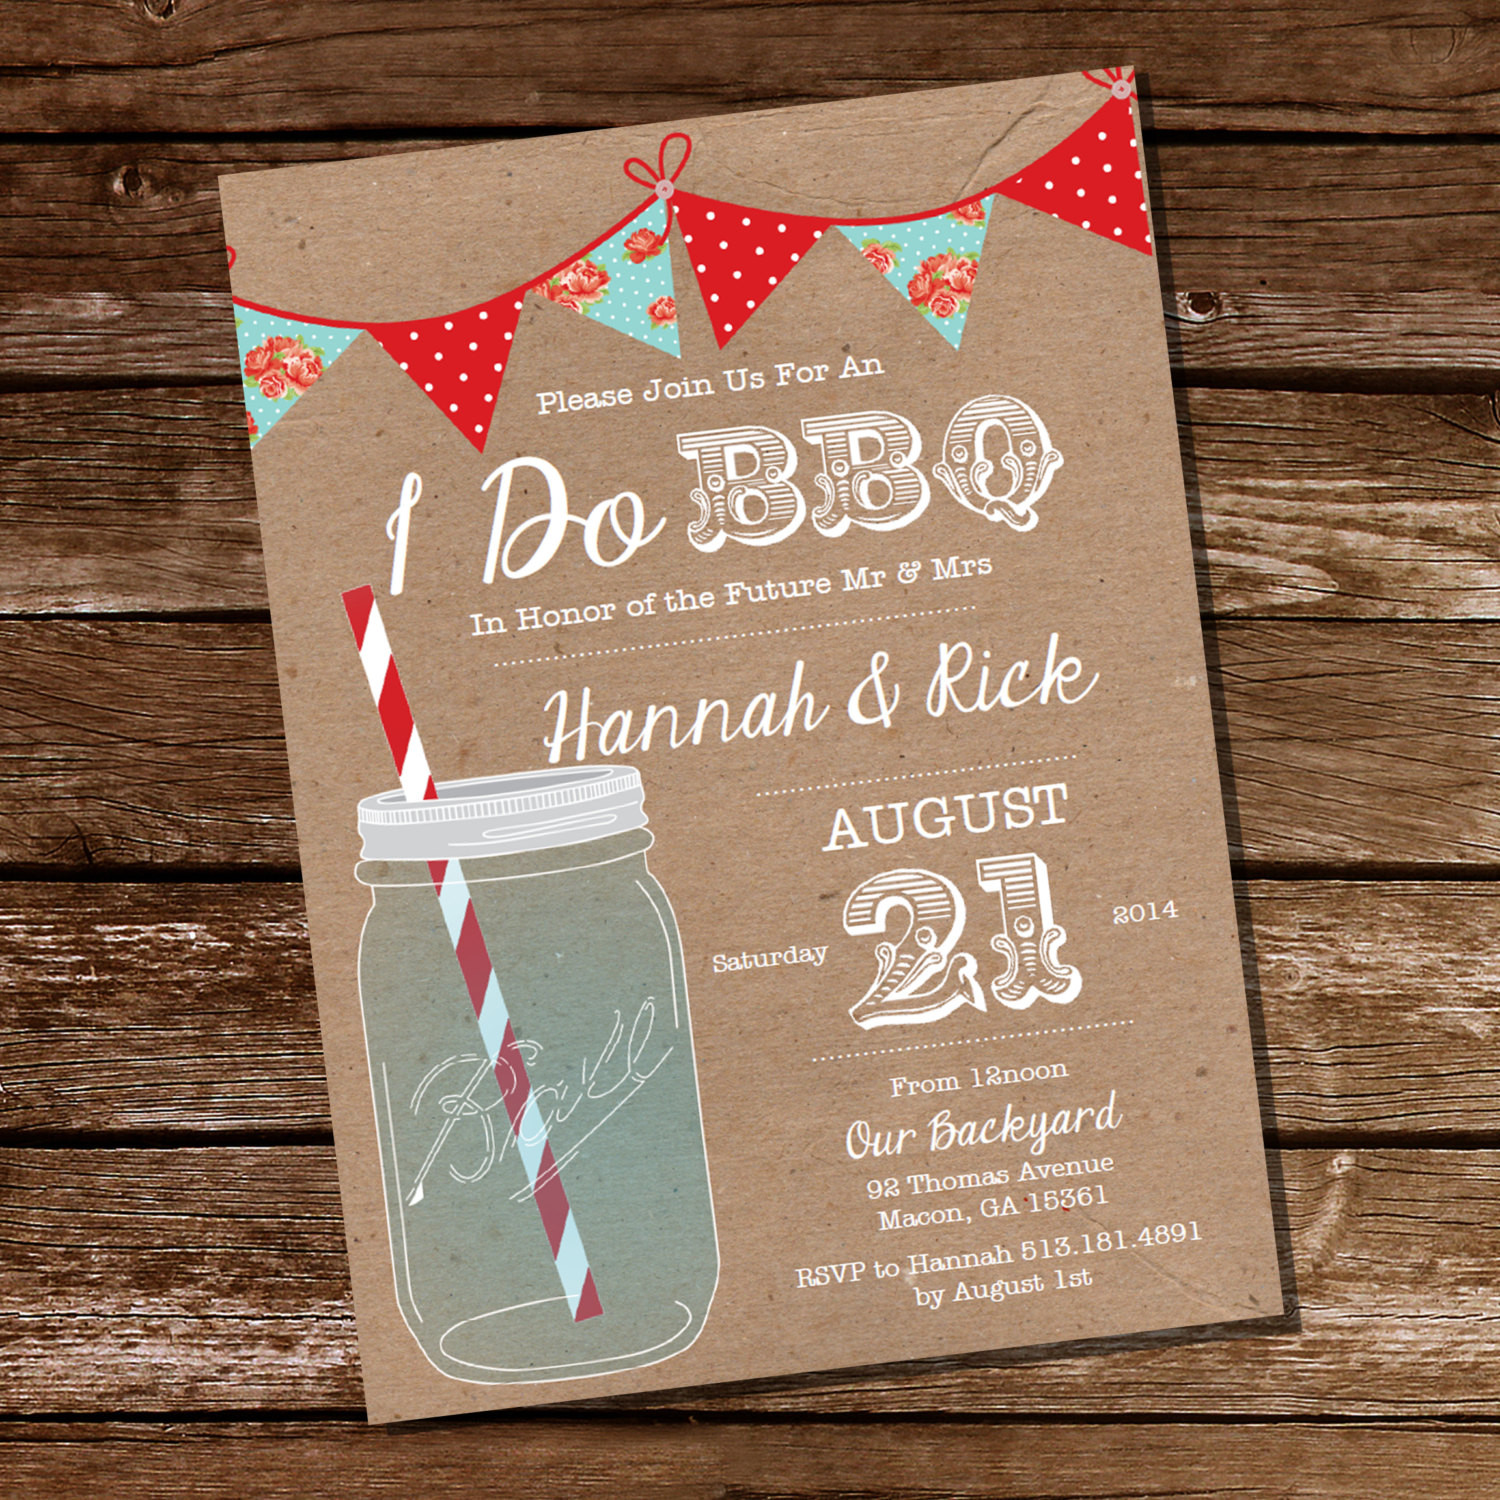 Shabby Chic Engagement Party Ideas
 Shabby Chic I Do BBQ lnvitation Engagement Party Invitation